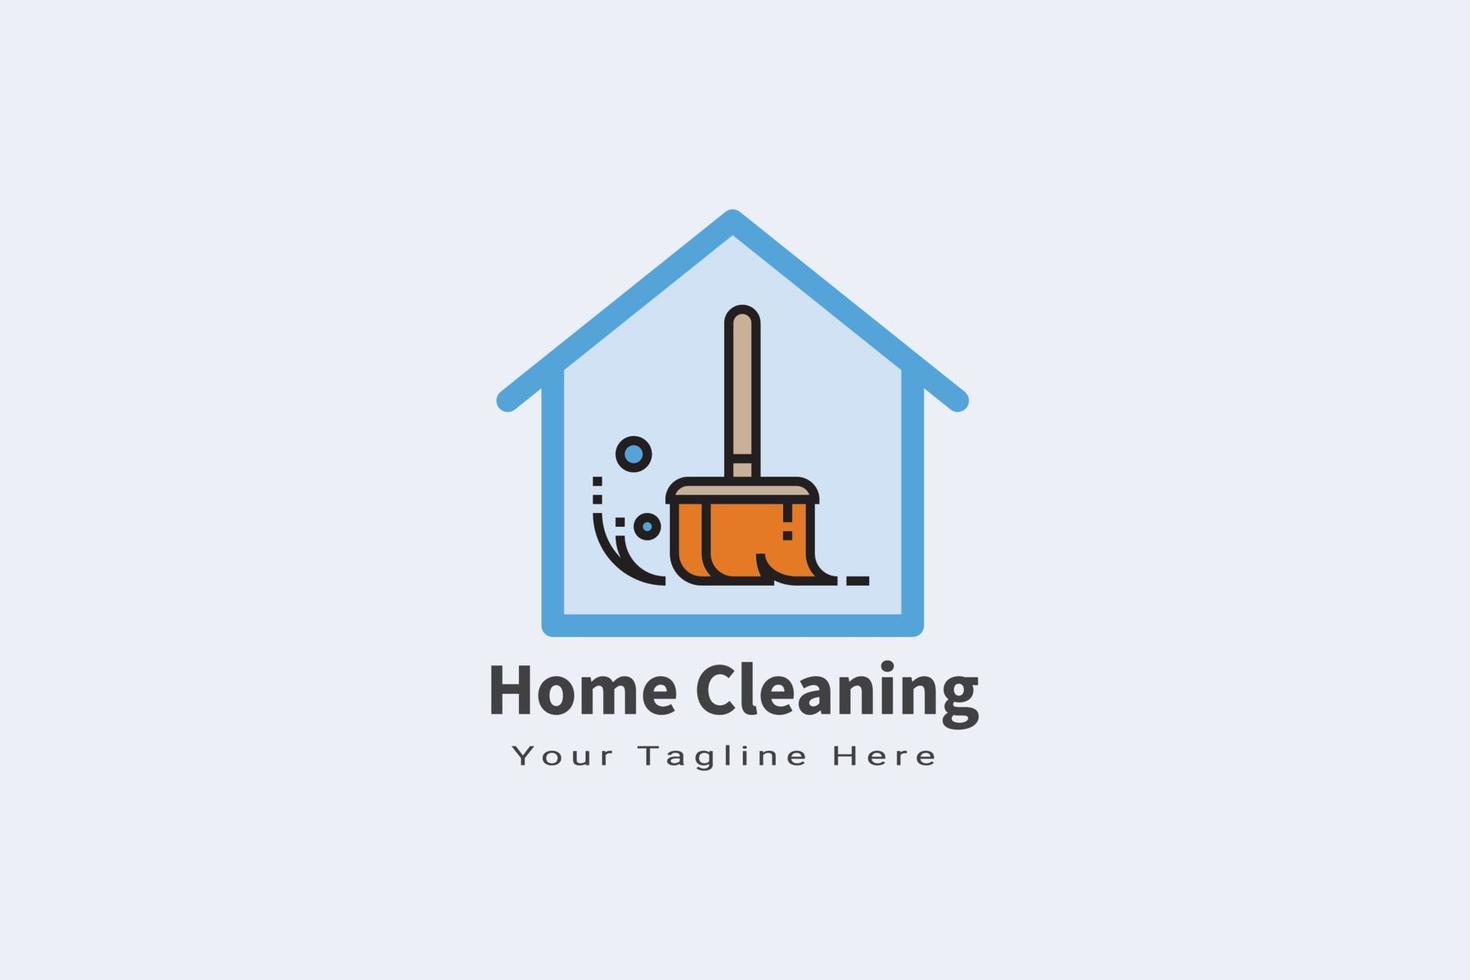 Home Cleaning logo for cleaning service company vector